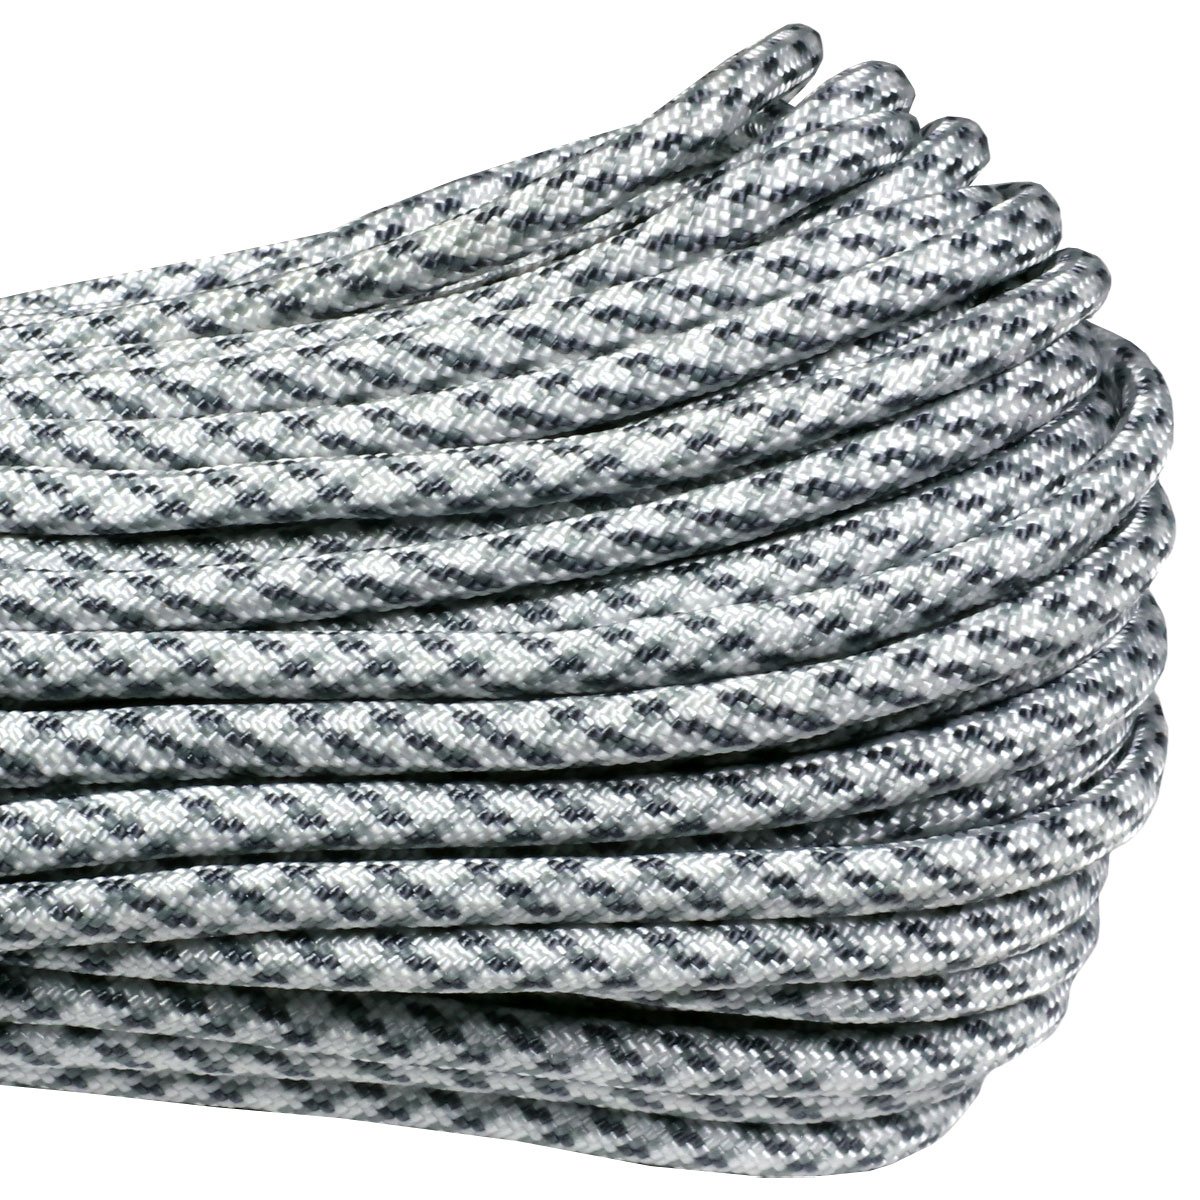 Atwood 550 Paracord - Arctic Camo